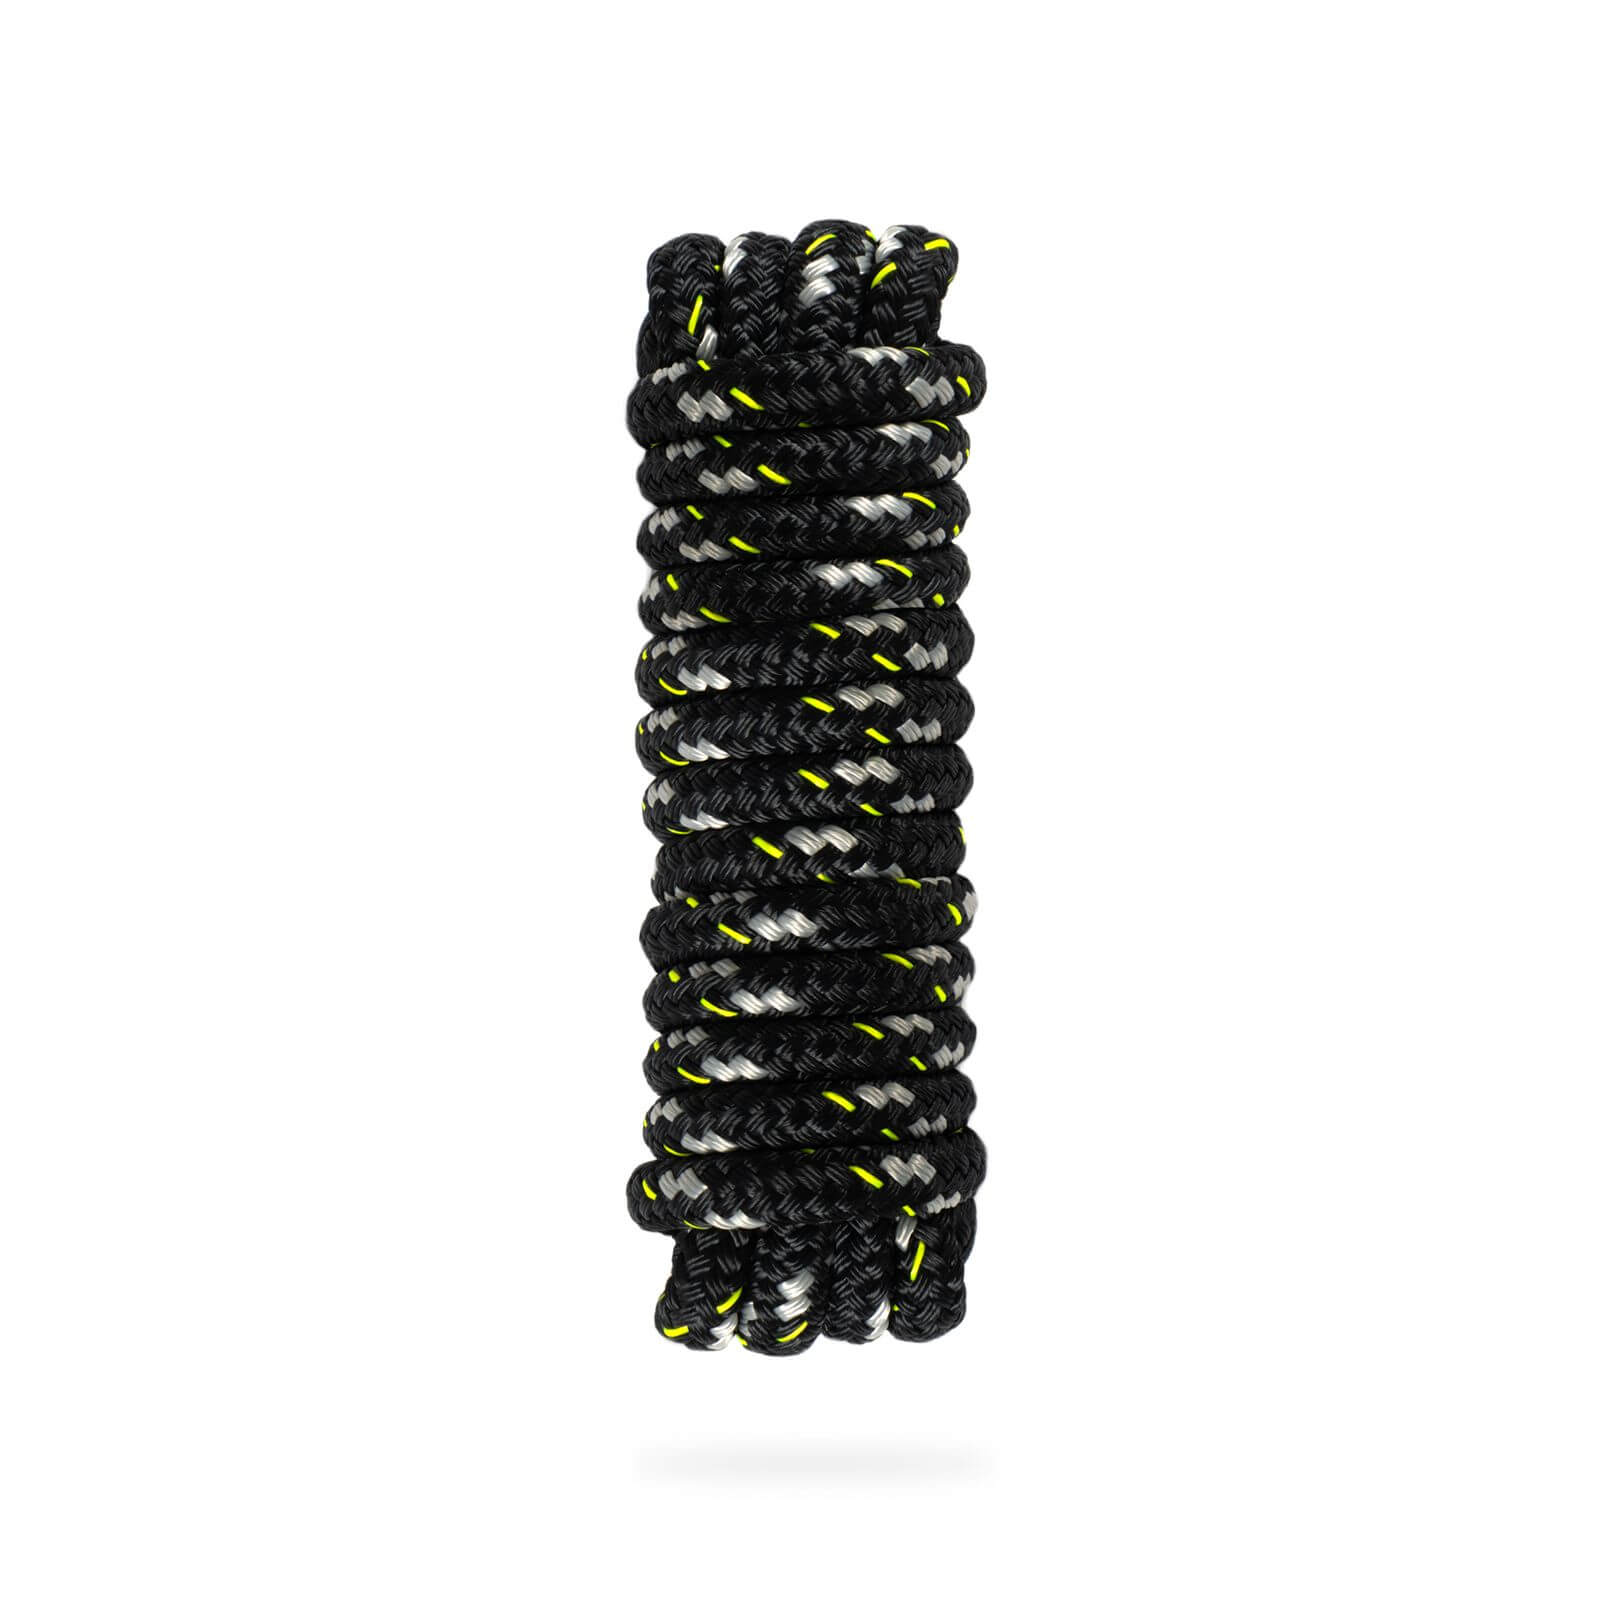 A high-strength, MISSION double braided rope in black and yellow on a white background.